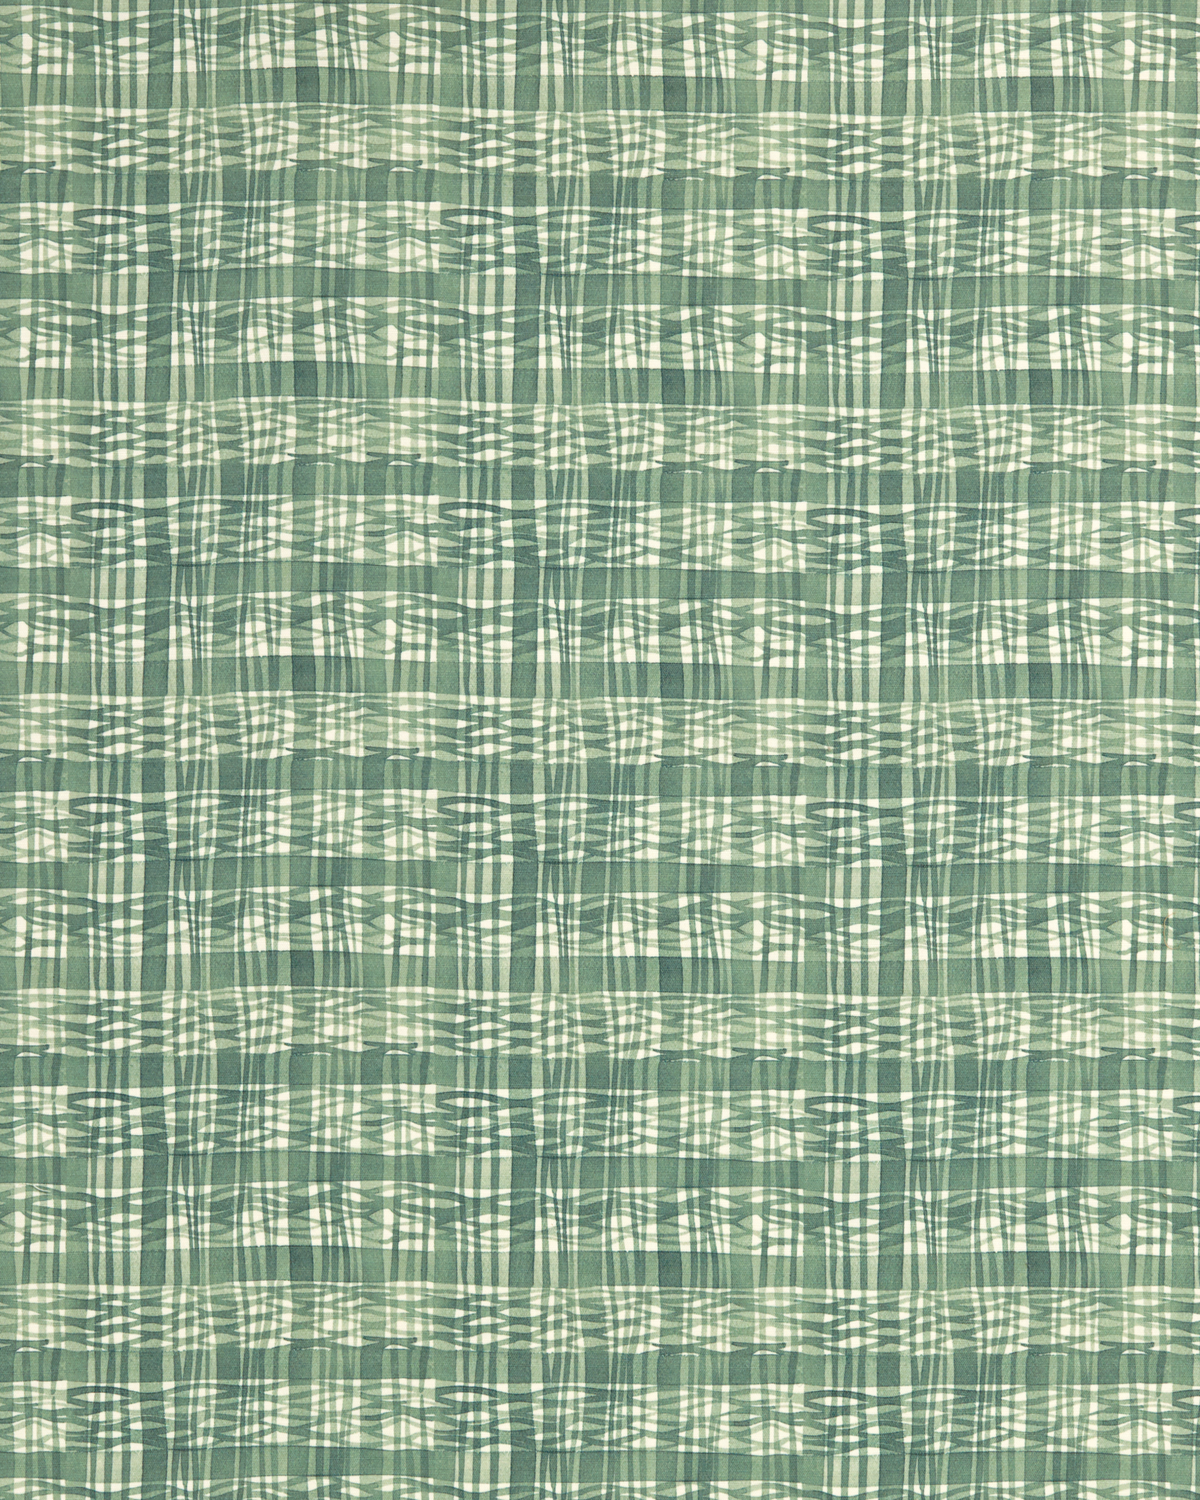 Thatched Fabric in Leafy Green